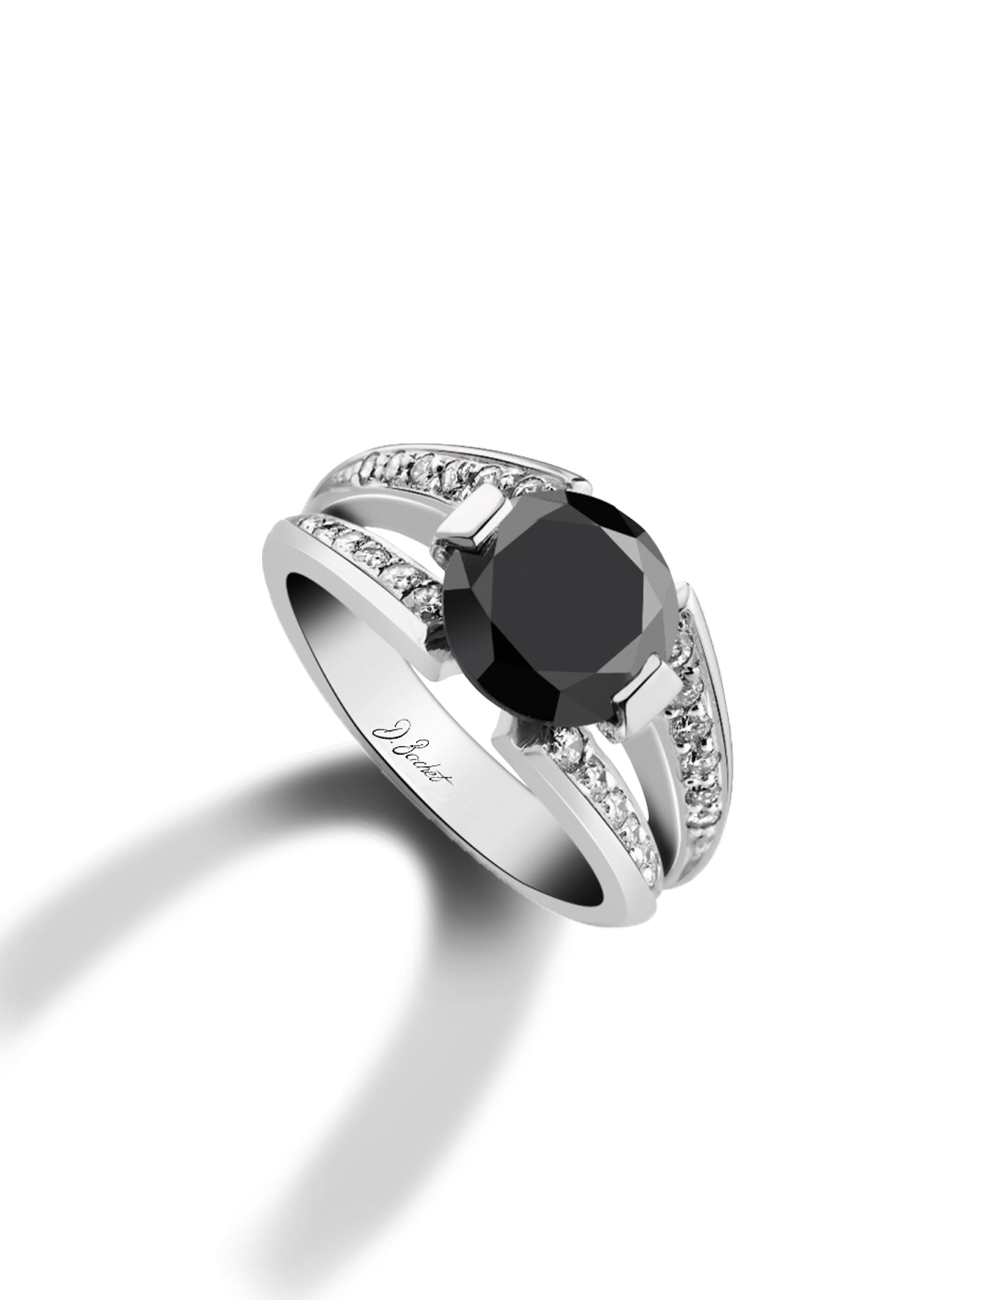 Unique 1ct black diamond engagement ring, elegantly set with two structured claws for a distinctive design.